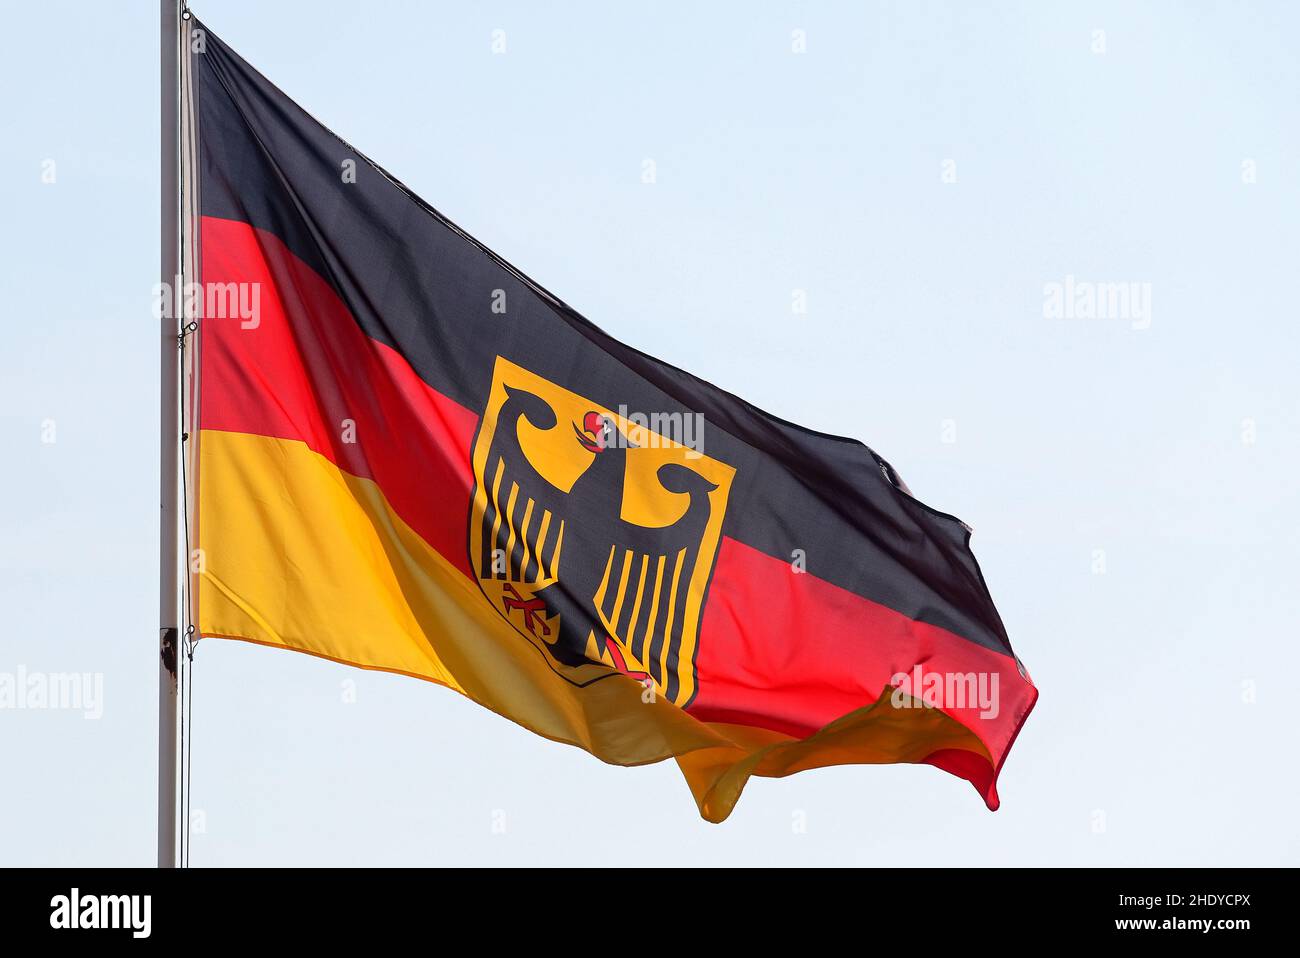 Does the national flag of Germany feature the eagle? - Quora